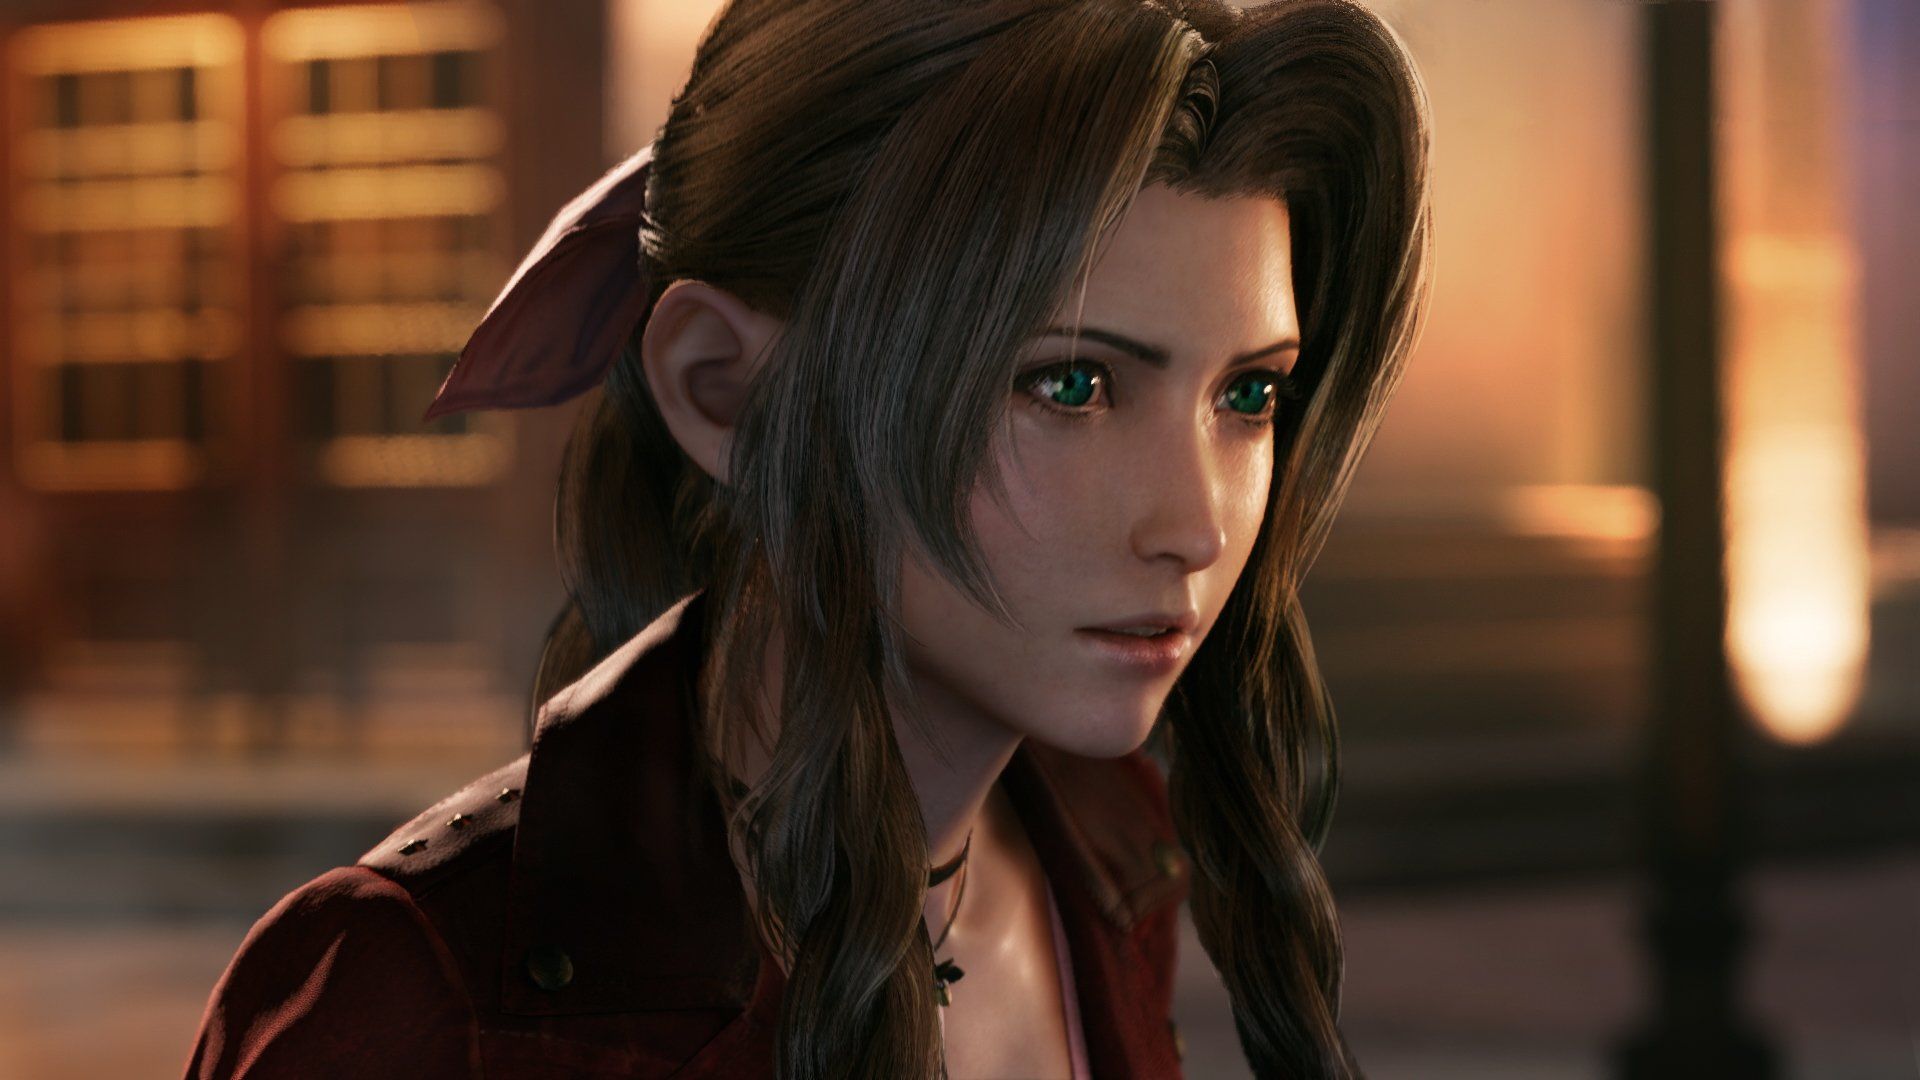 Final Fantasy VII Remake's Aerith and Tifa Receive Lovely New Free